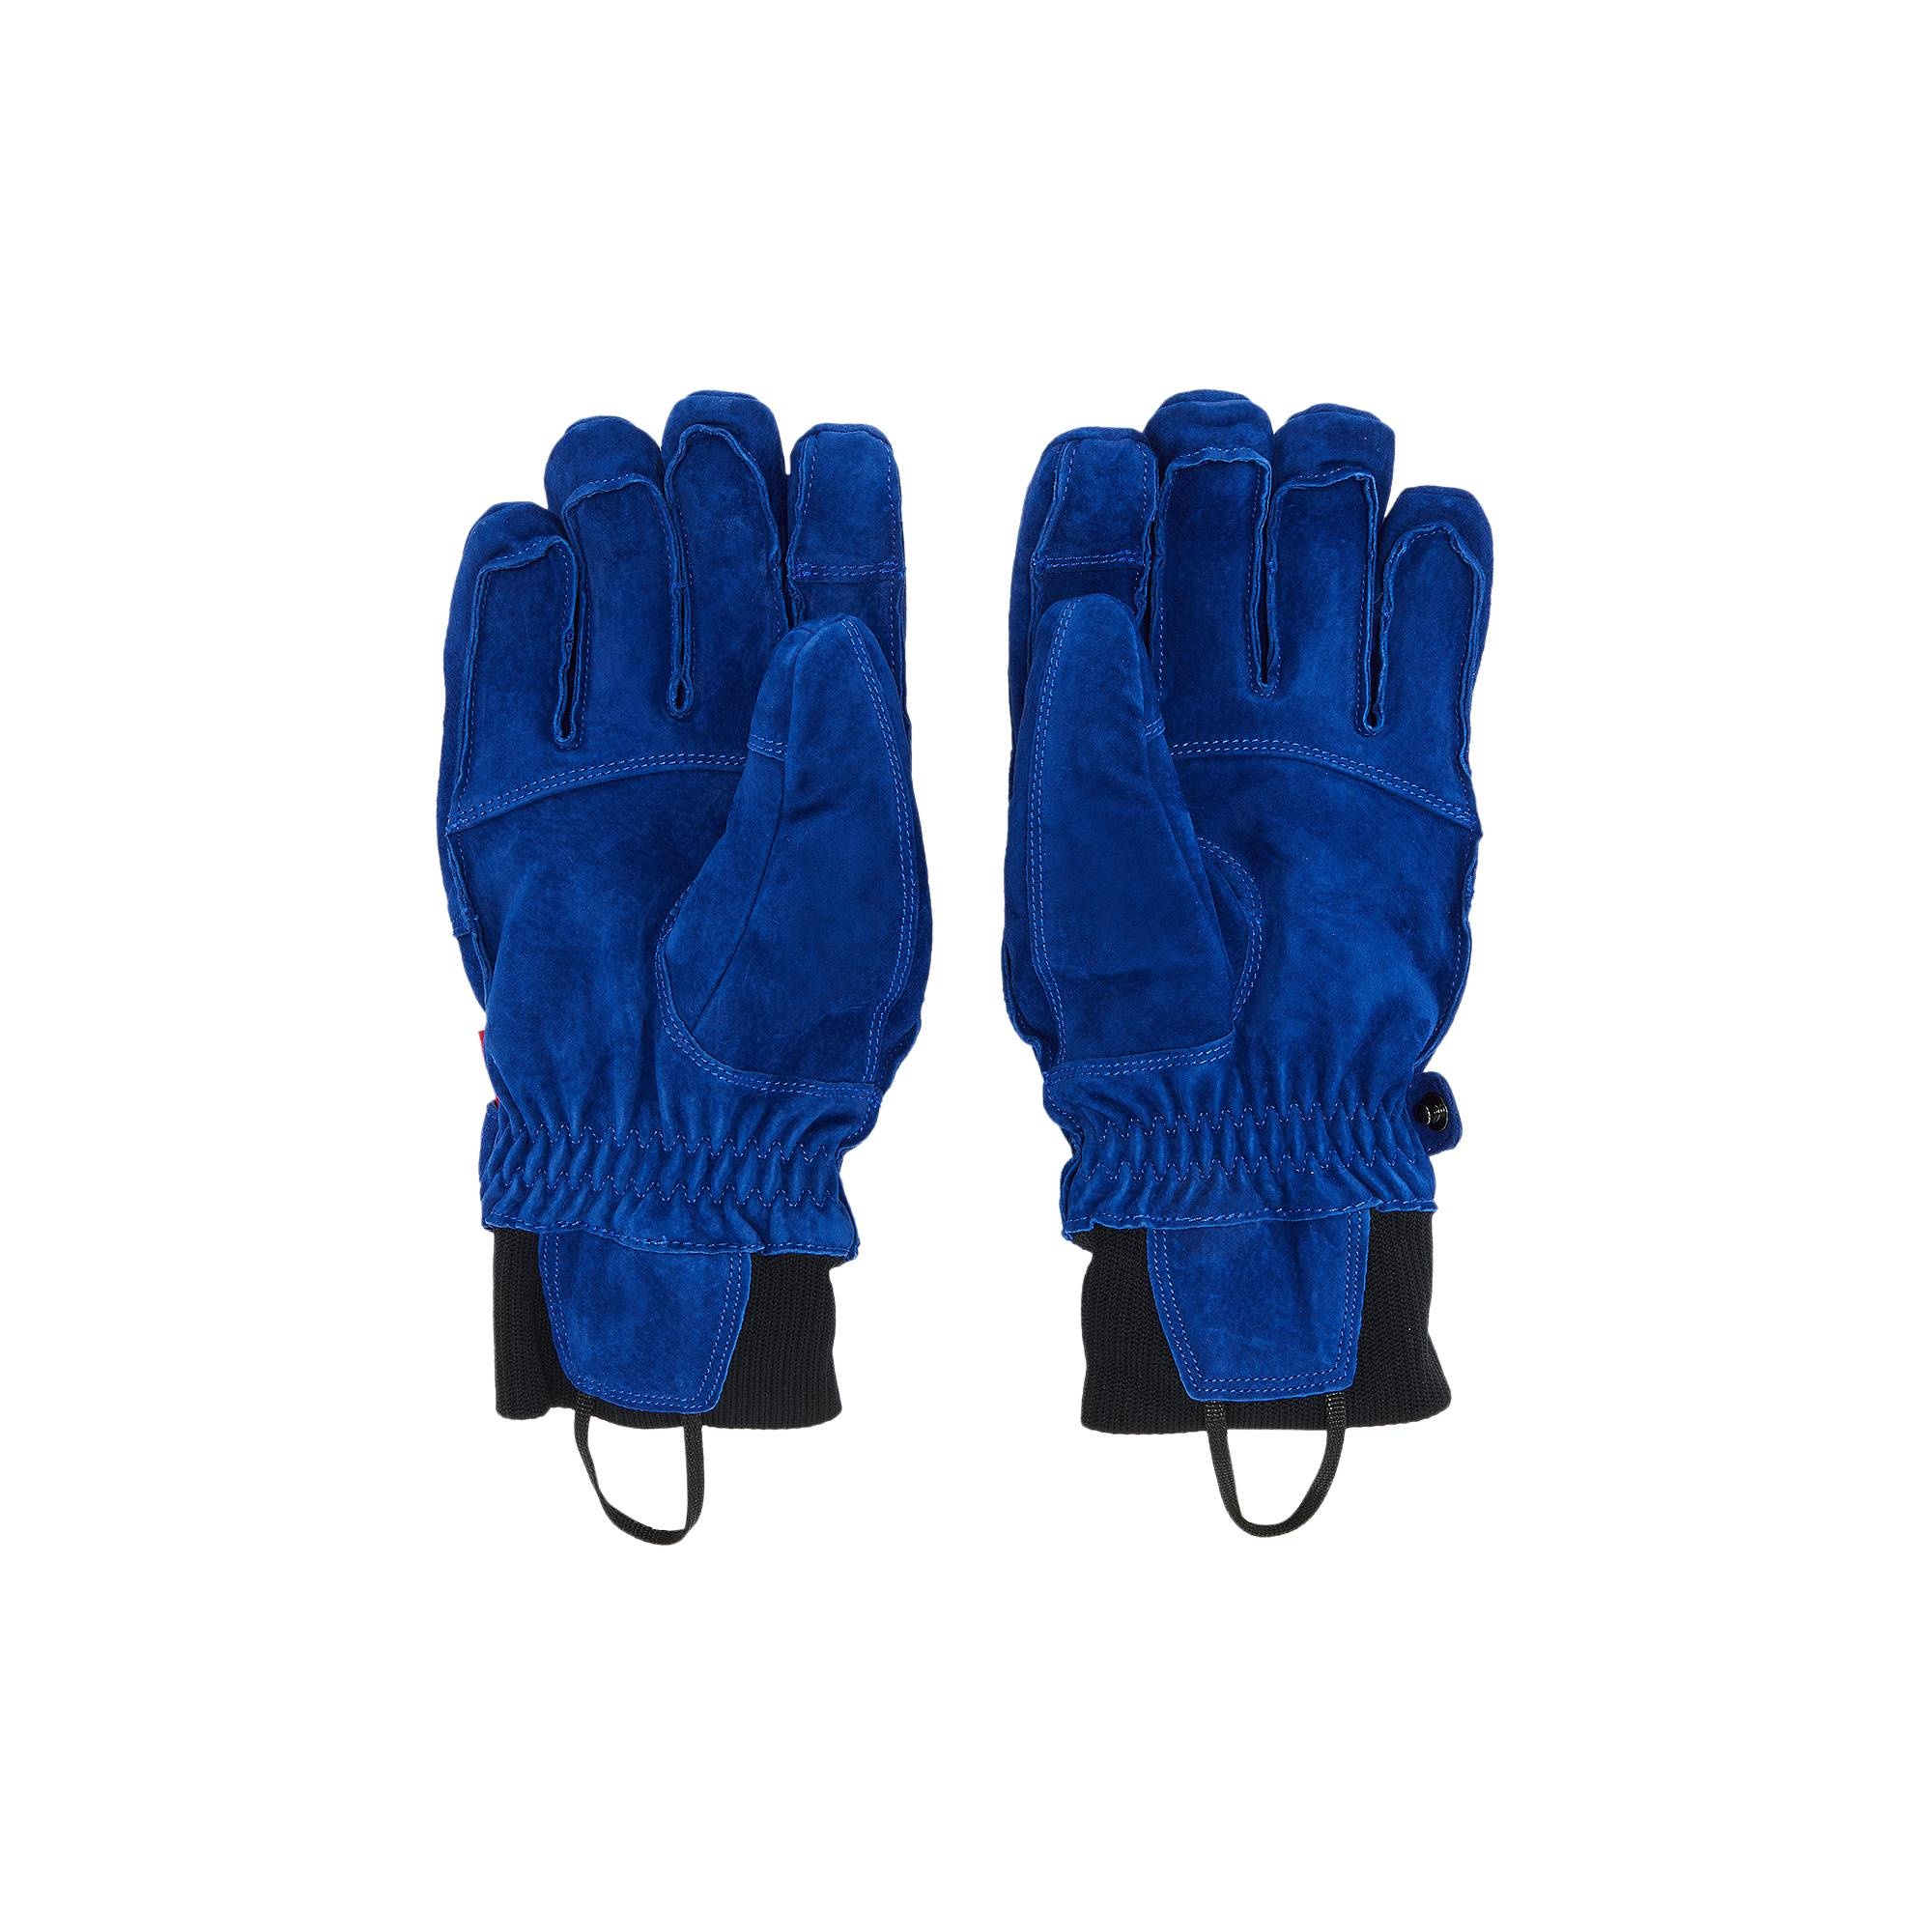 Supreme x The North Face Suede Glove 'Blue'